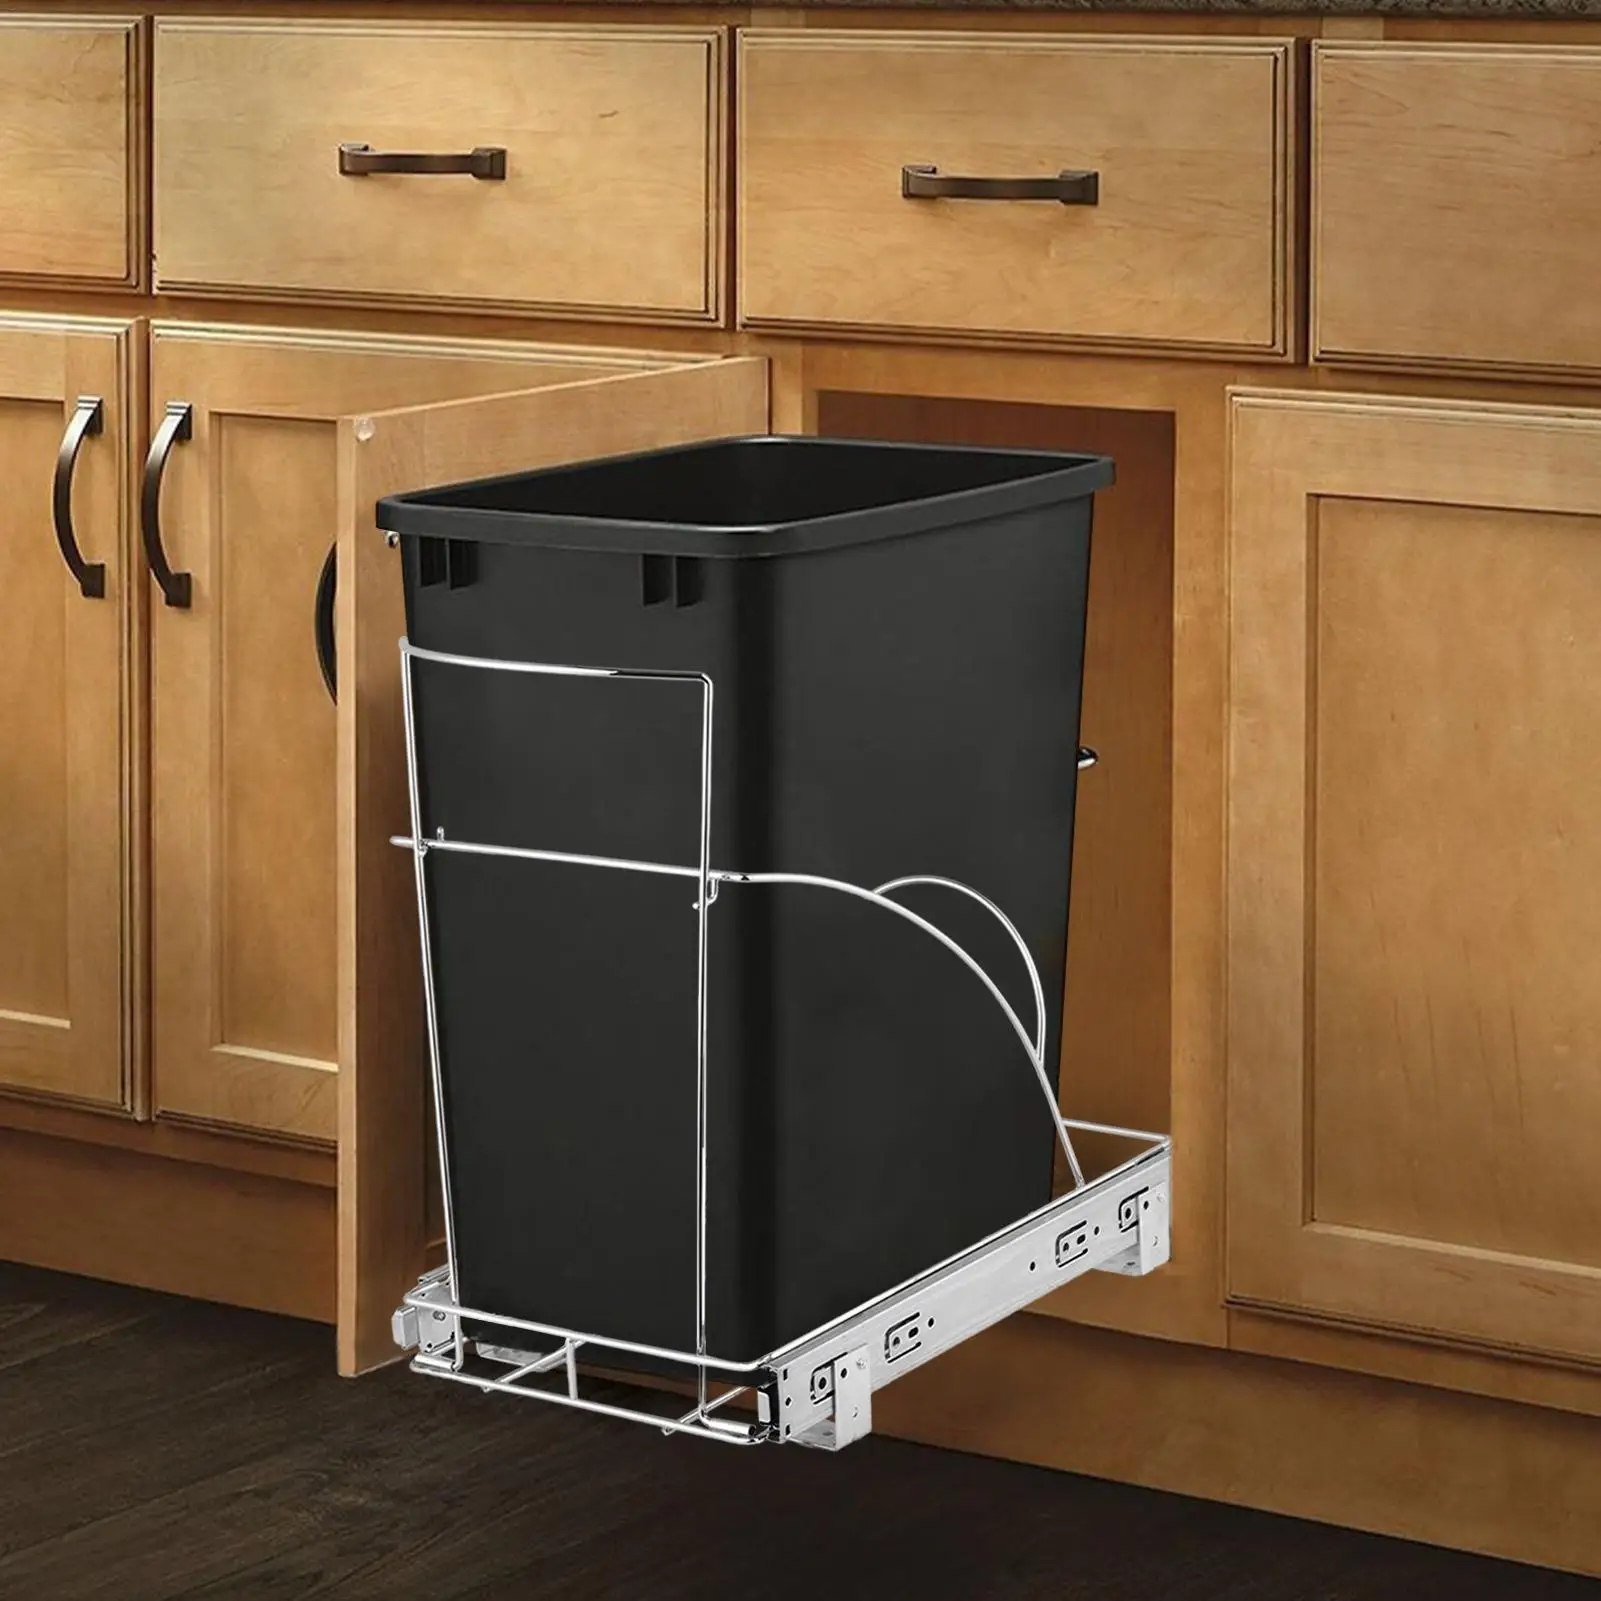 7.6 Gallon Pull Out Trash Can Slides | Garbage Recycling Bins Holder Under Cabinet | Bottom Mount Pu